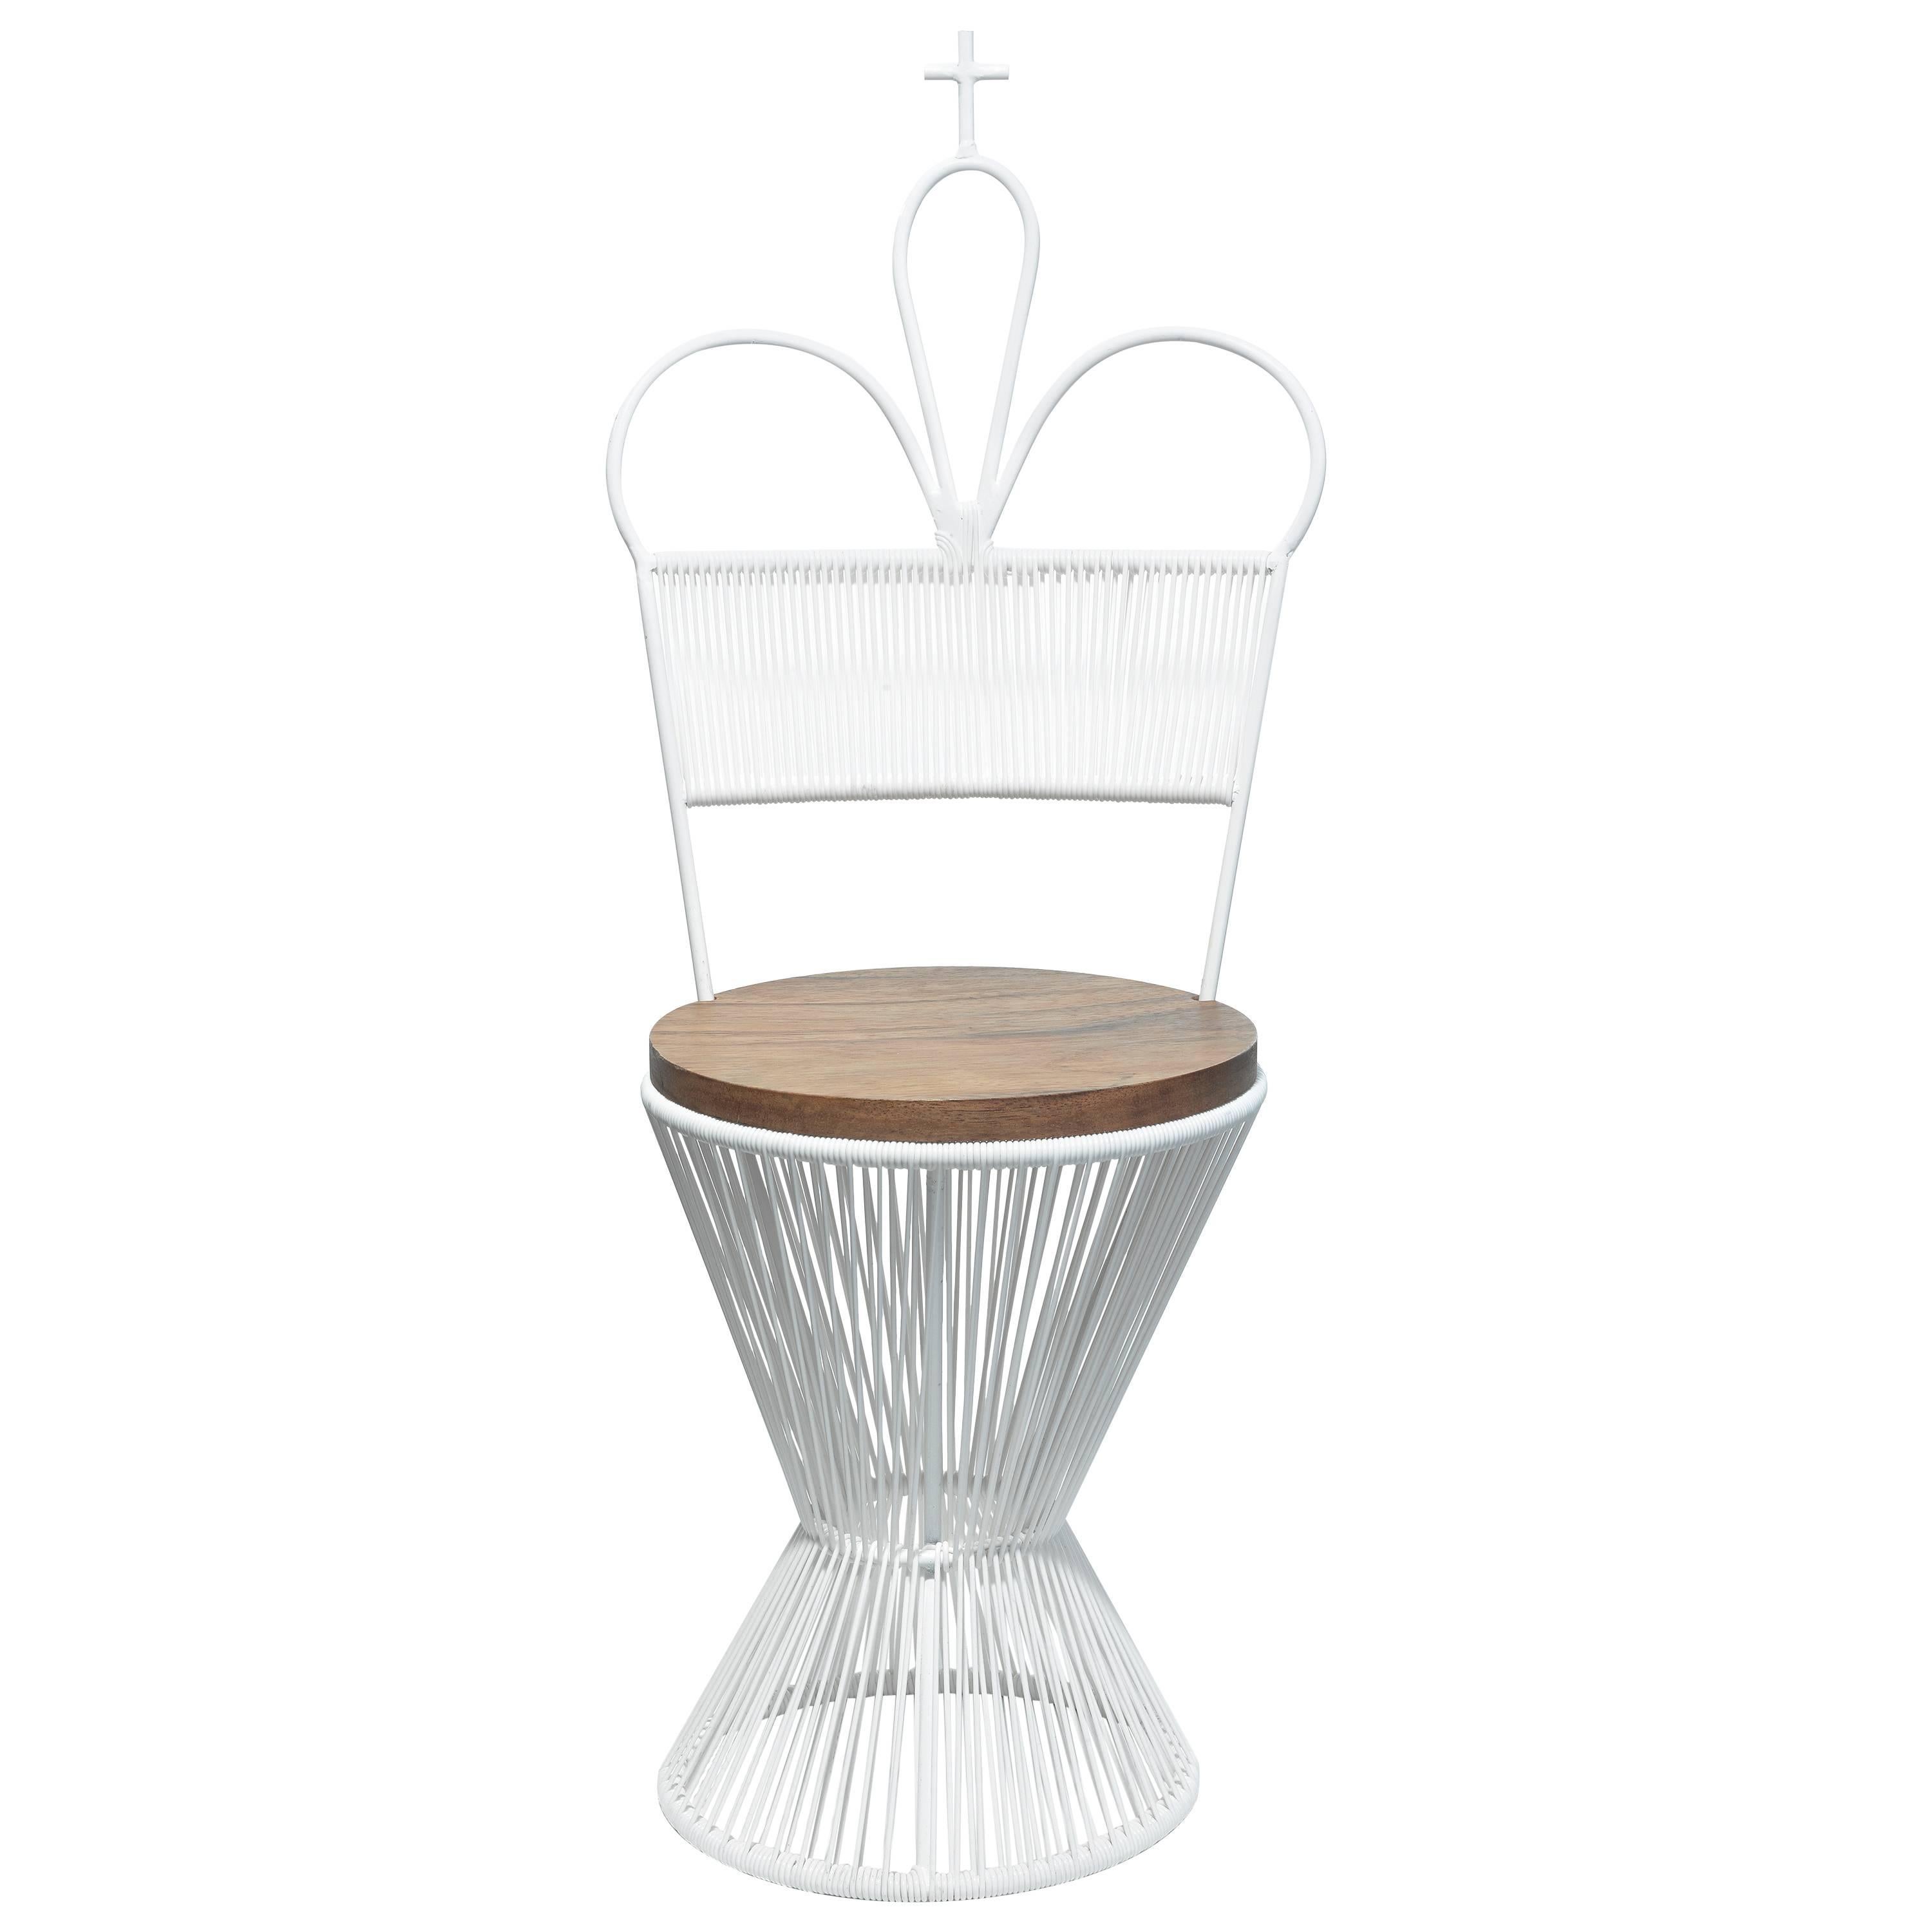 "Design Chess" King Chair by Mexa in White For Sale